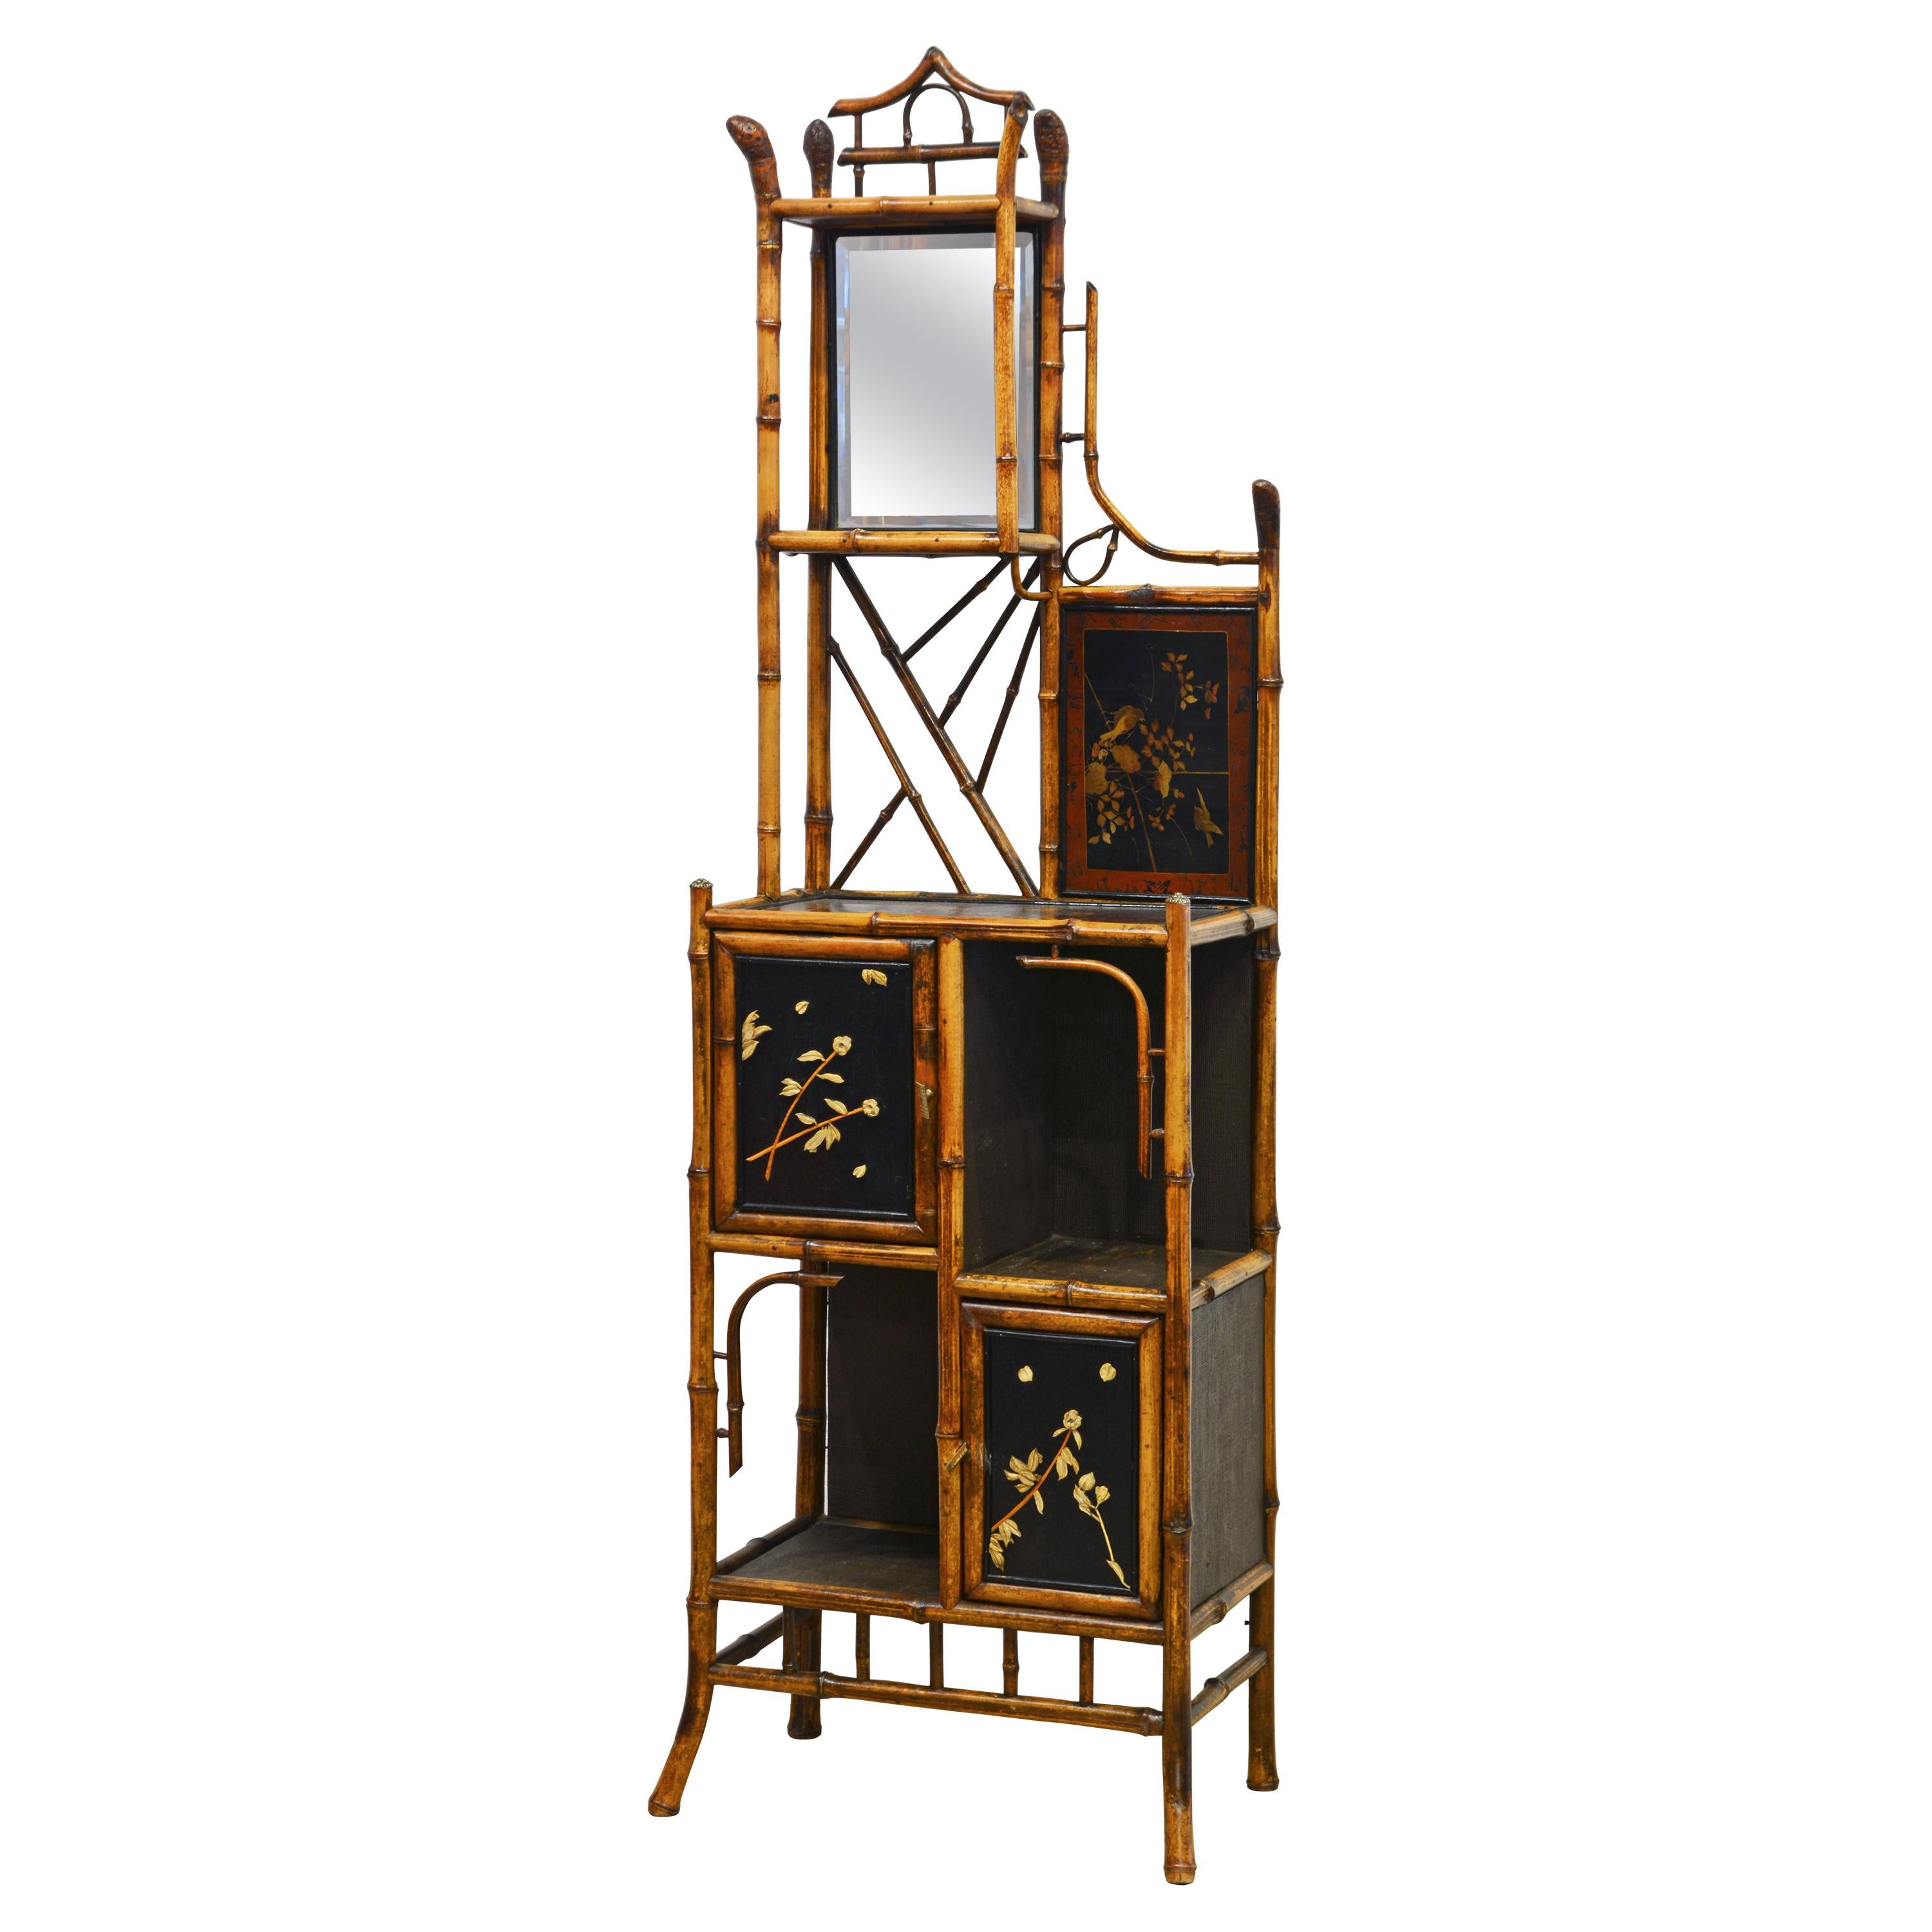 English 19th Century Aesthetic Movement Style Bamboo and Lacquer Etagere